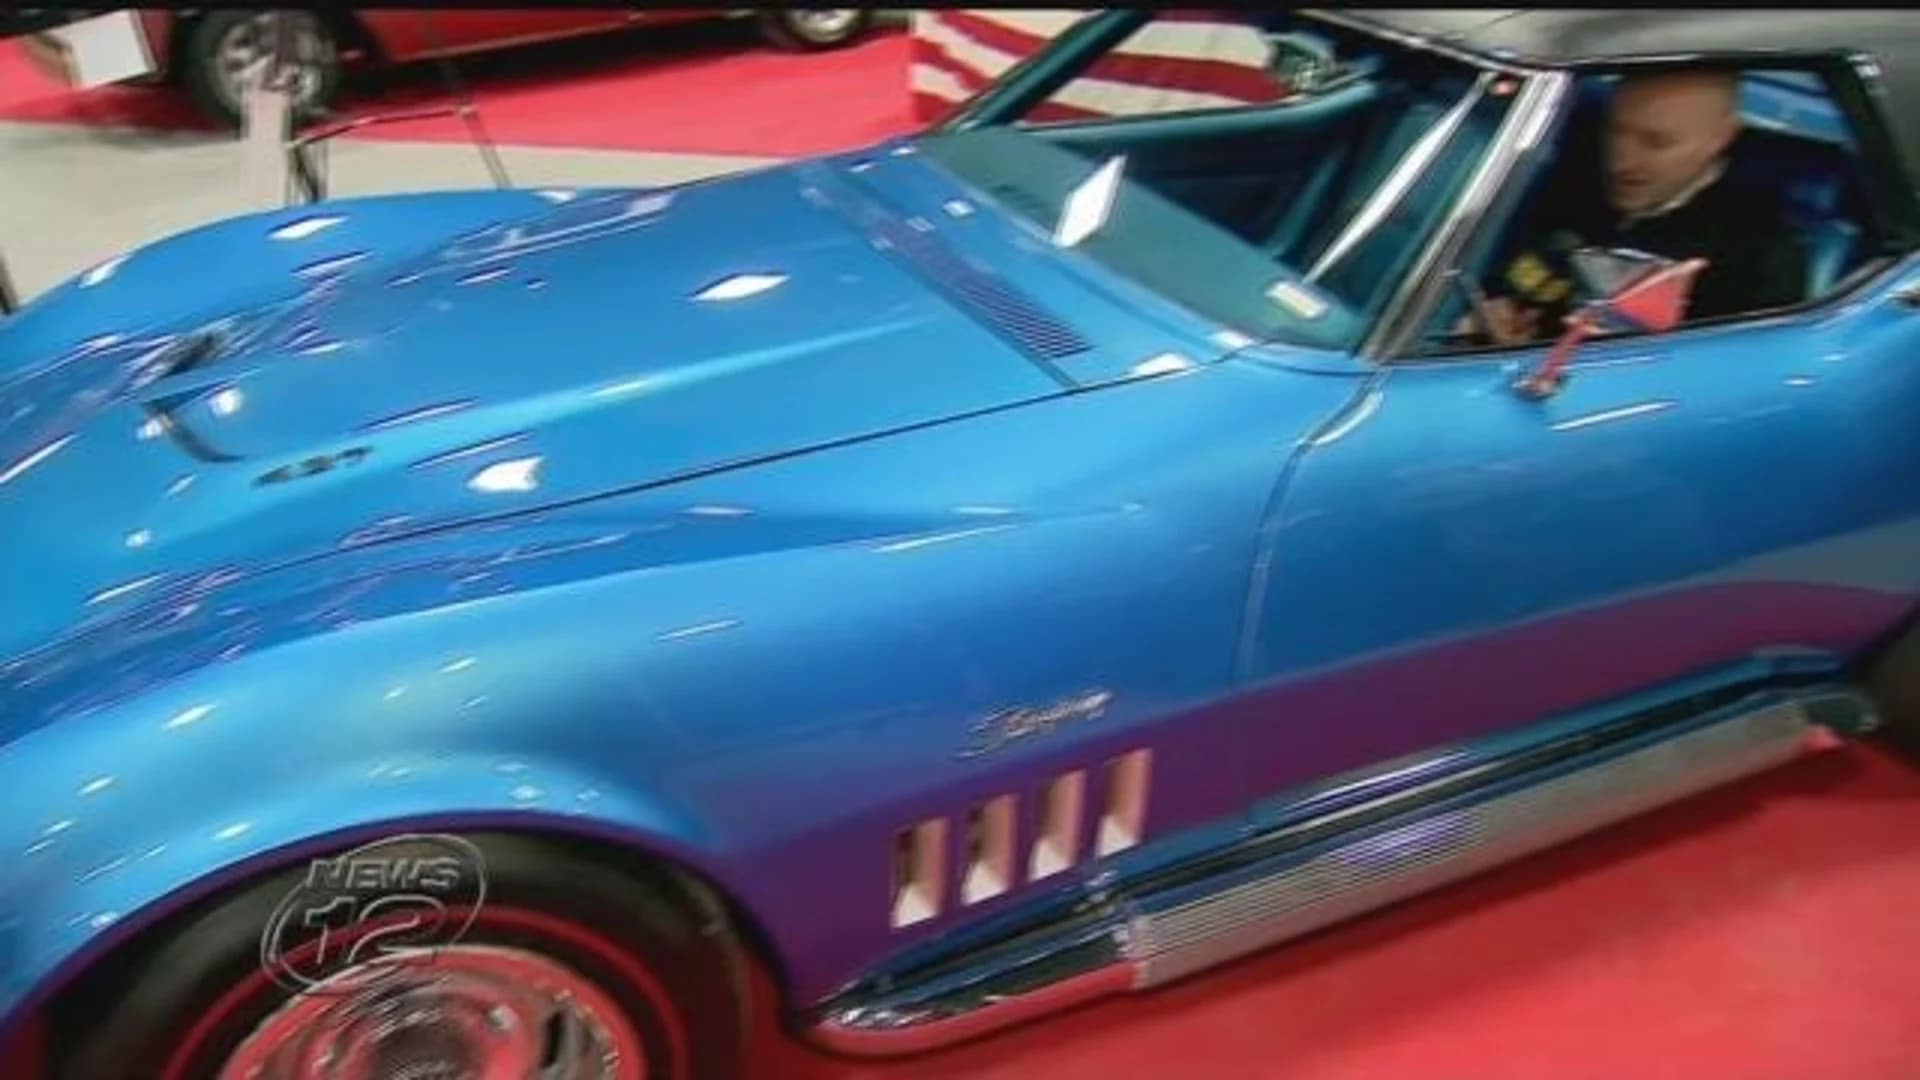 Annual antique and sport car auction held at NJ Convention & Expo Center